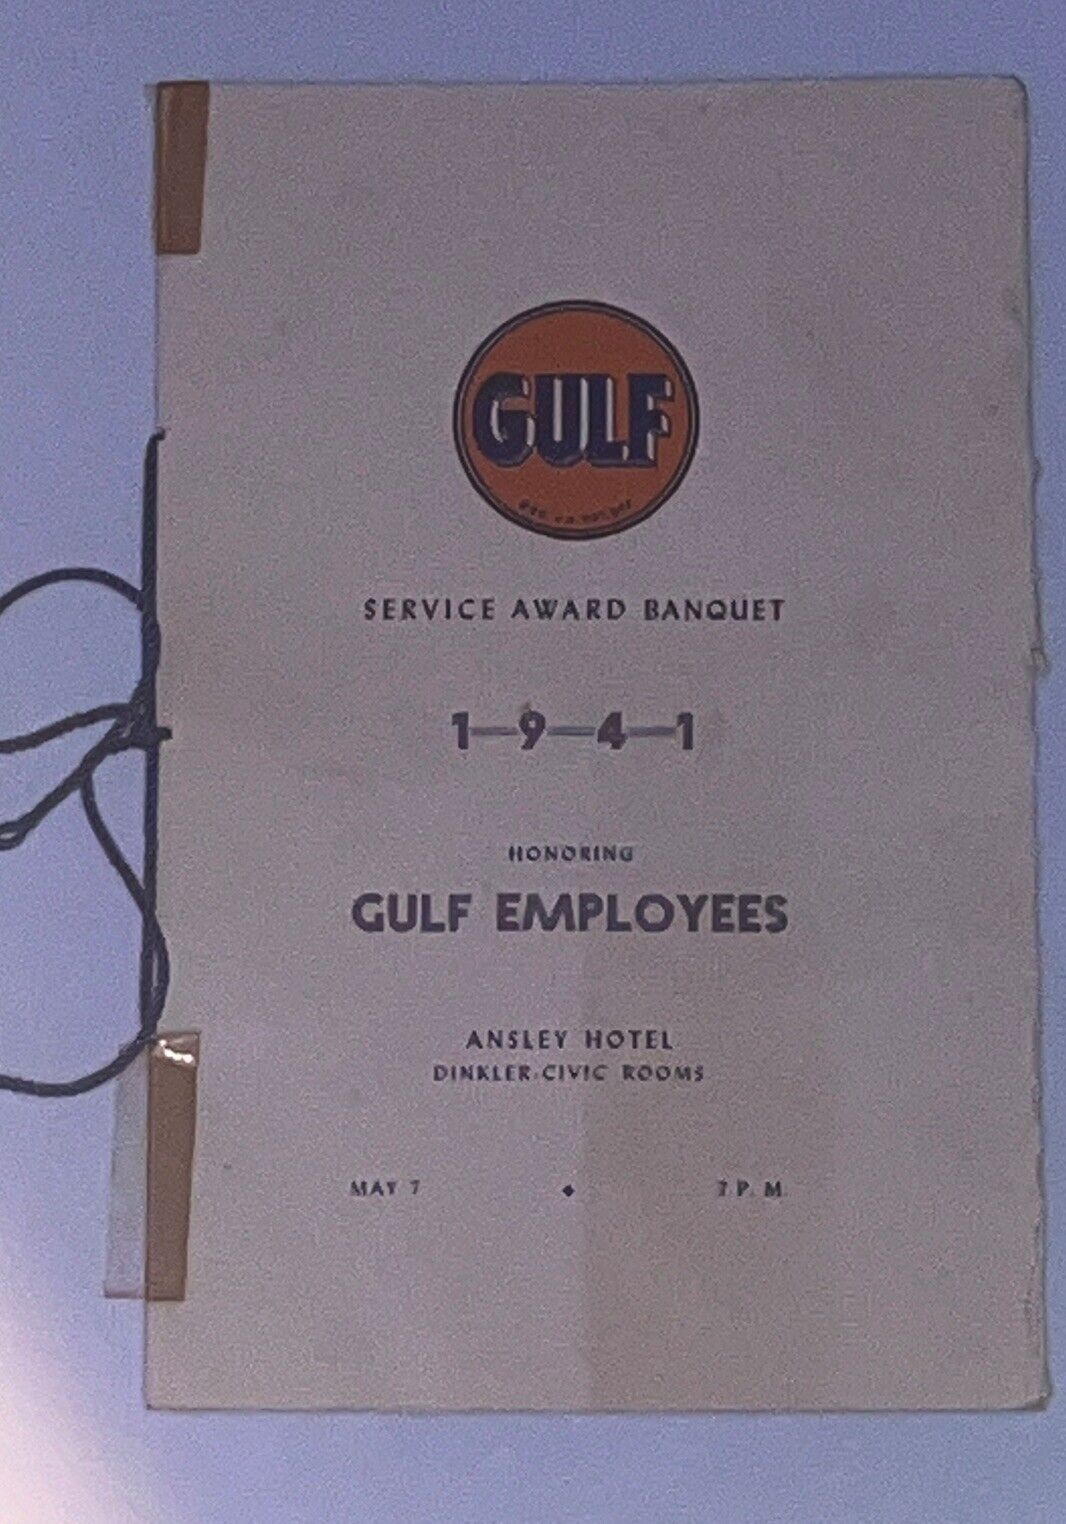 GULF OIL 1941 Service Award Banquet Program- Signed By Pres And Division Manager